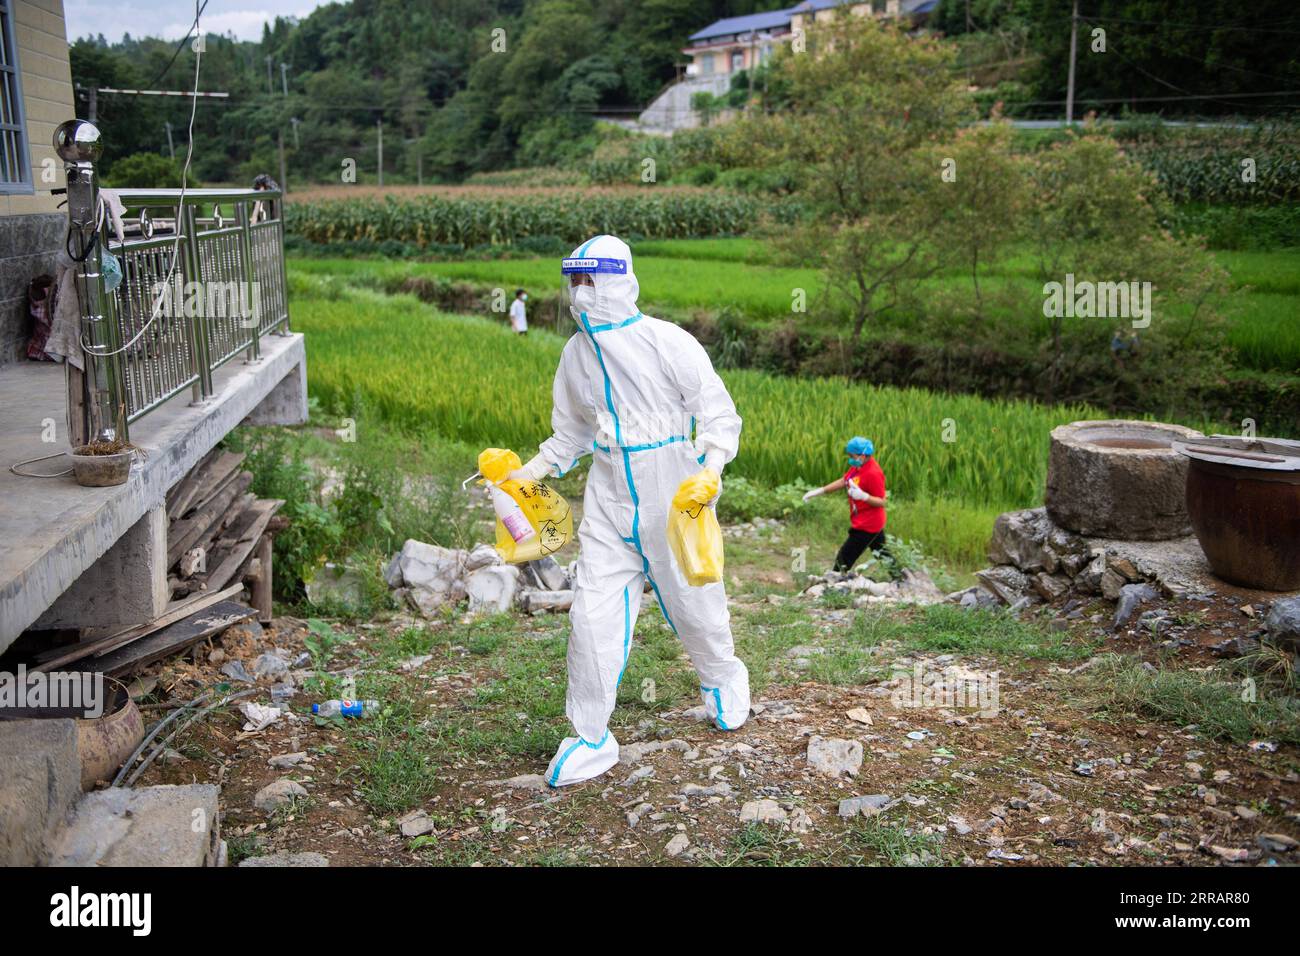 210814 -- ZHANGJIAJIE, Aug. 14, 2021 -- Luo Jinwu walks to offer door-to-door nucleic acid sampling services in Yangping Village of Yongding District in Zhangjiajie City, central China s Hunan Province, Aug. 12, 2021. Luo Jinwu and his wife Xiang Ka are medical workers from Zhangjiajie Hospital of Traditional Chinese Medicine. Since the recent resurgence of COVID-19 in Zhangjiajie from July 29, Luo has been conducting nucleic acid tests especially in the countryside, while Xiang has stationed in the hospital to attend to patients. Being apart for about half a month, the couple kept in contact Stock Photo